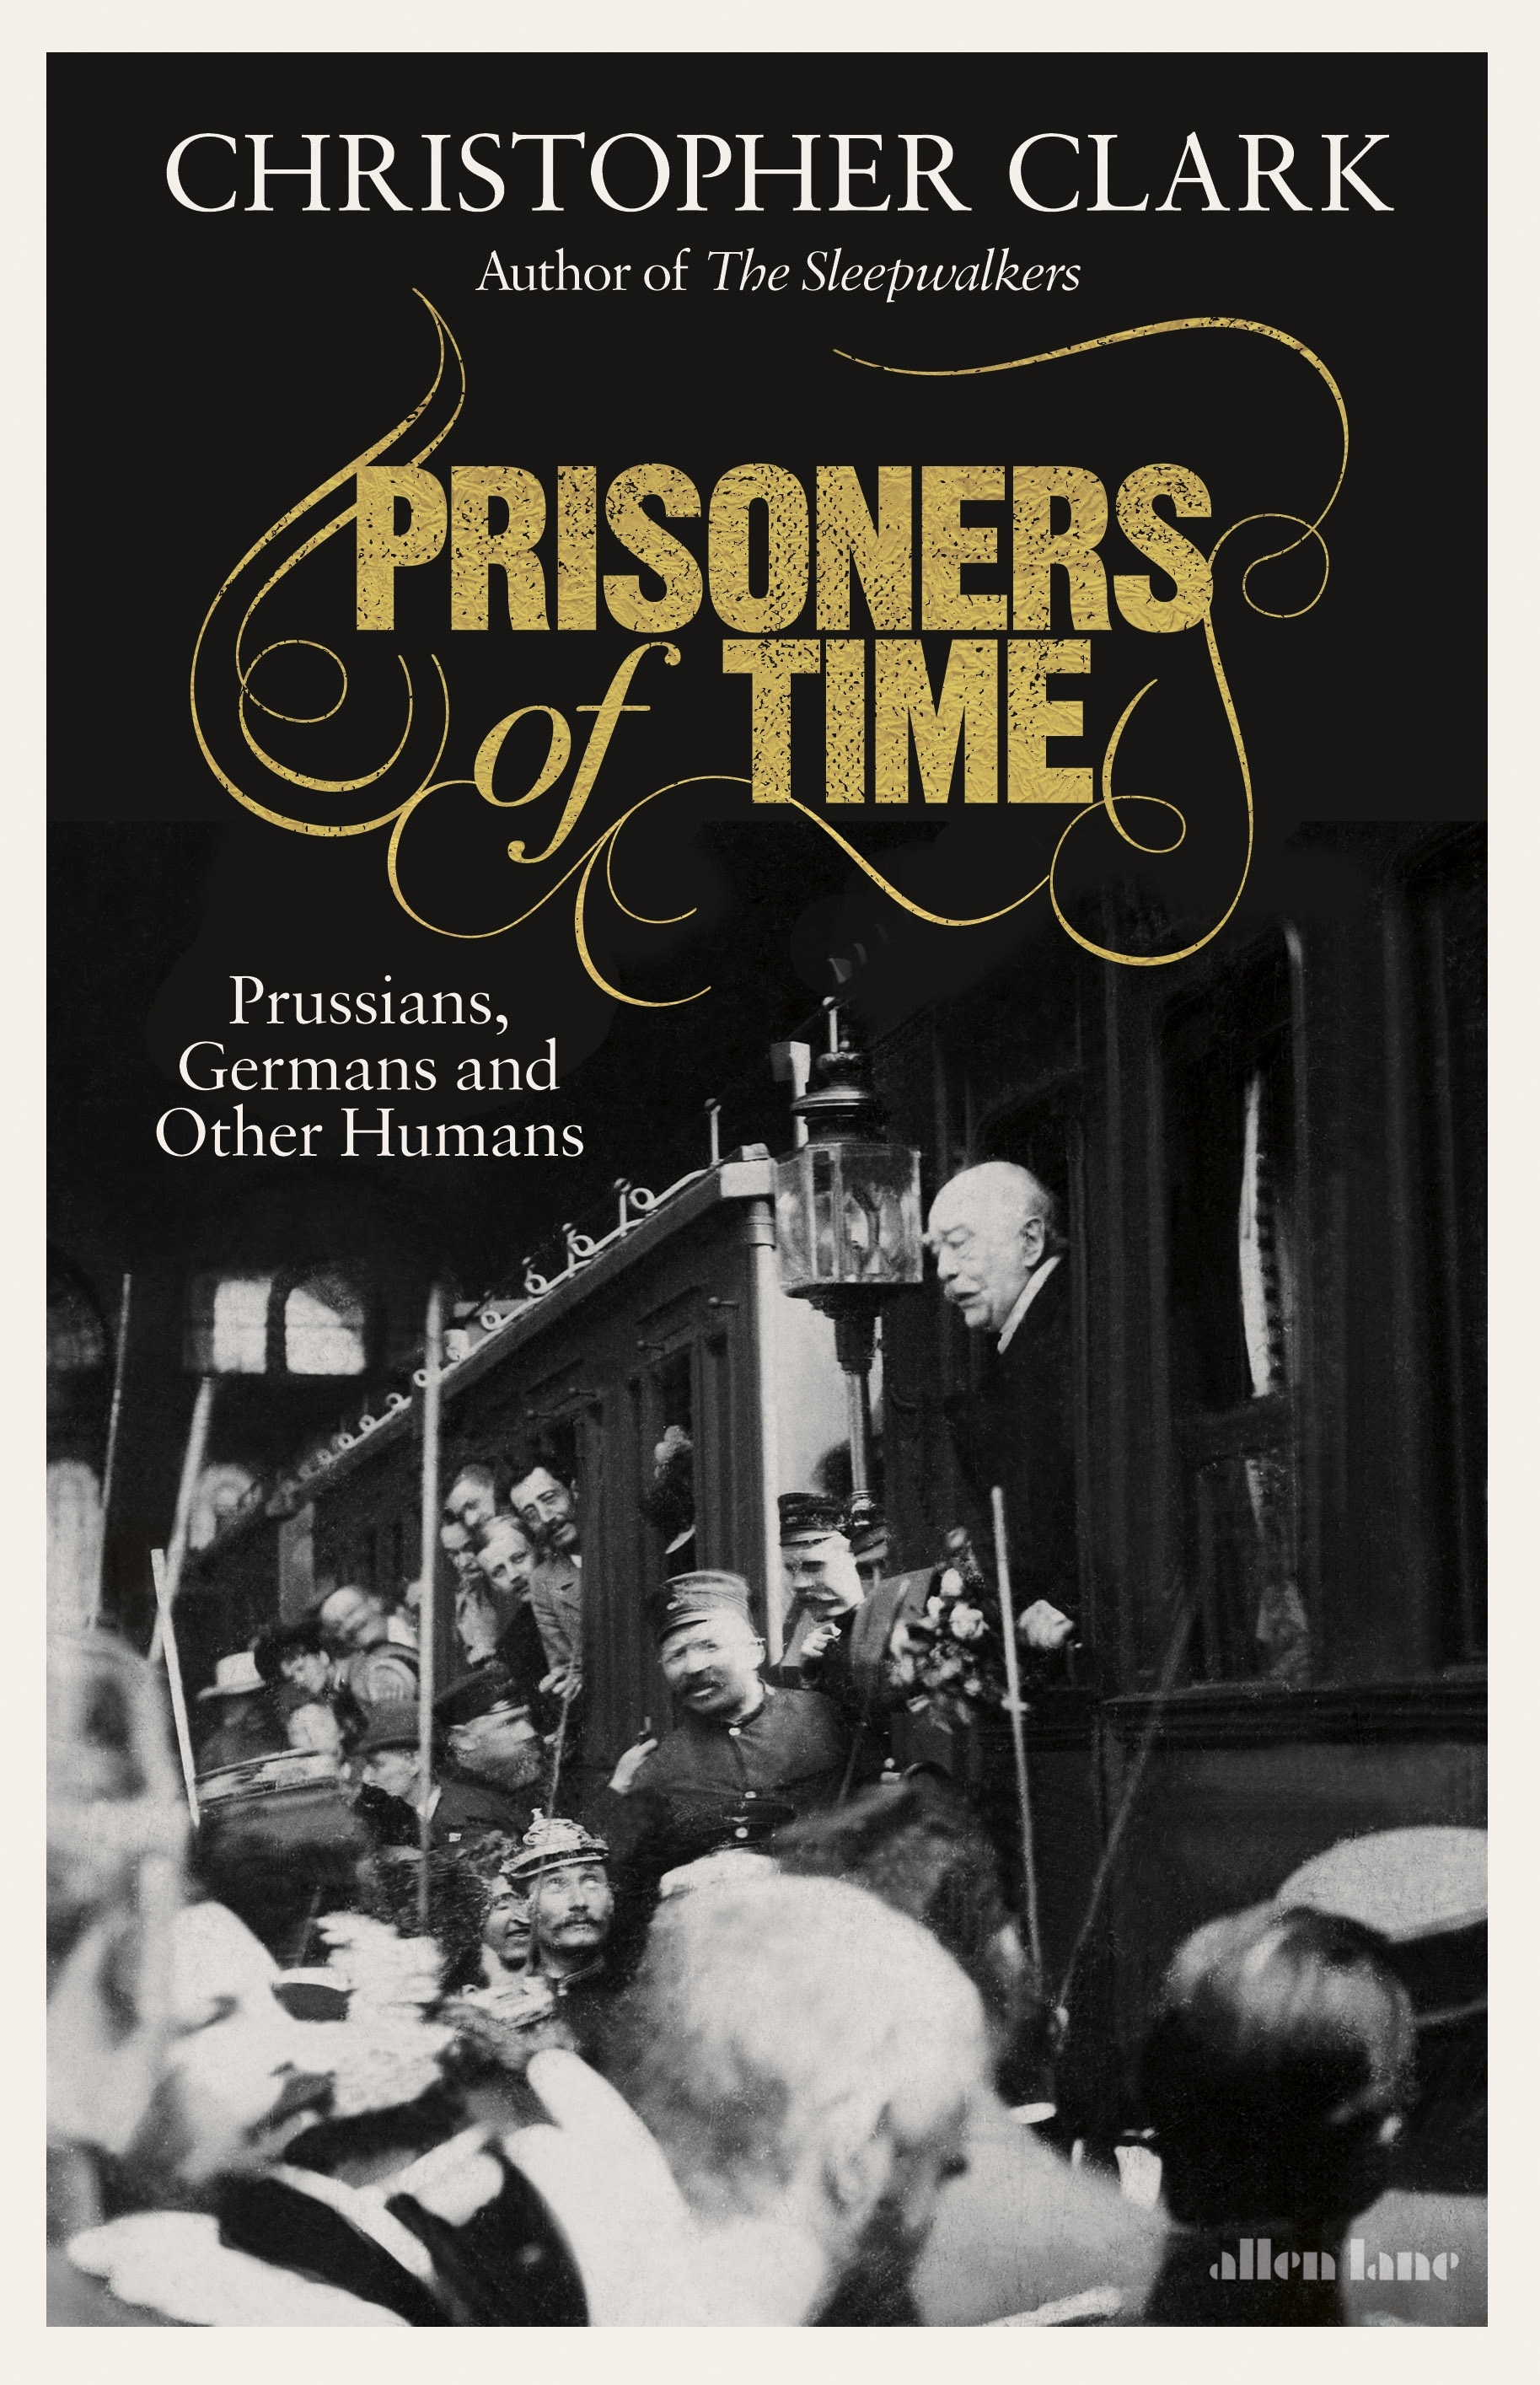 Book “Prisoners of Time” by Christopher Clark — August 5, 2021